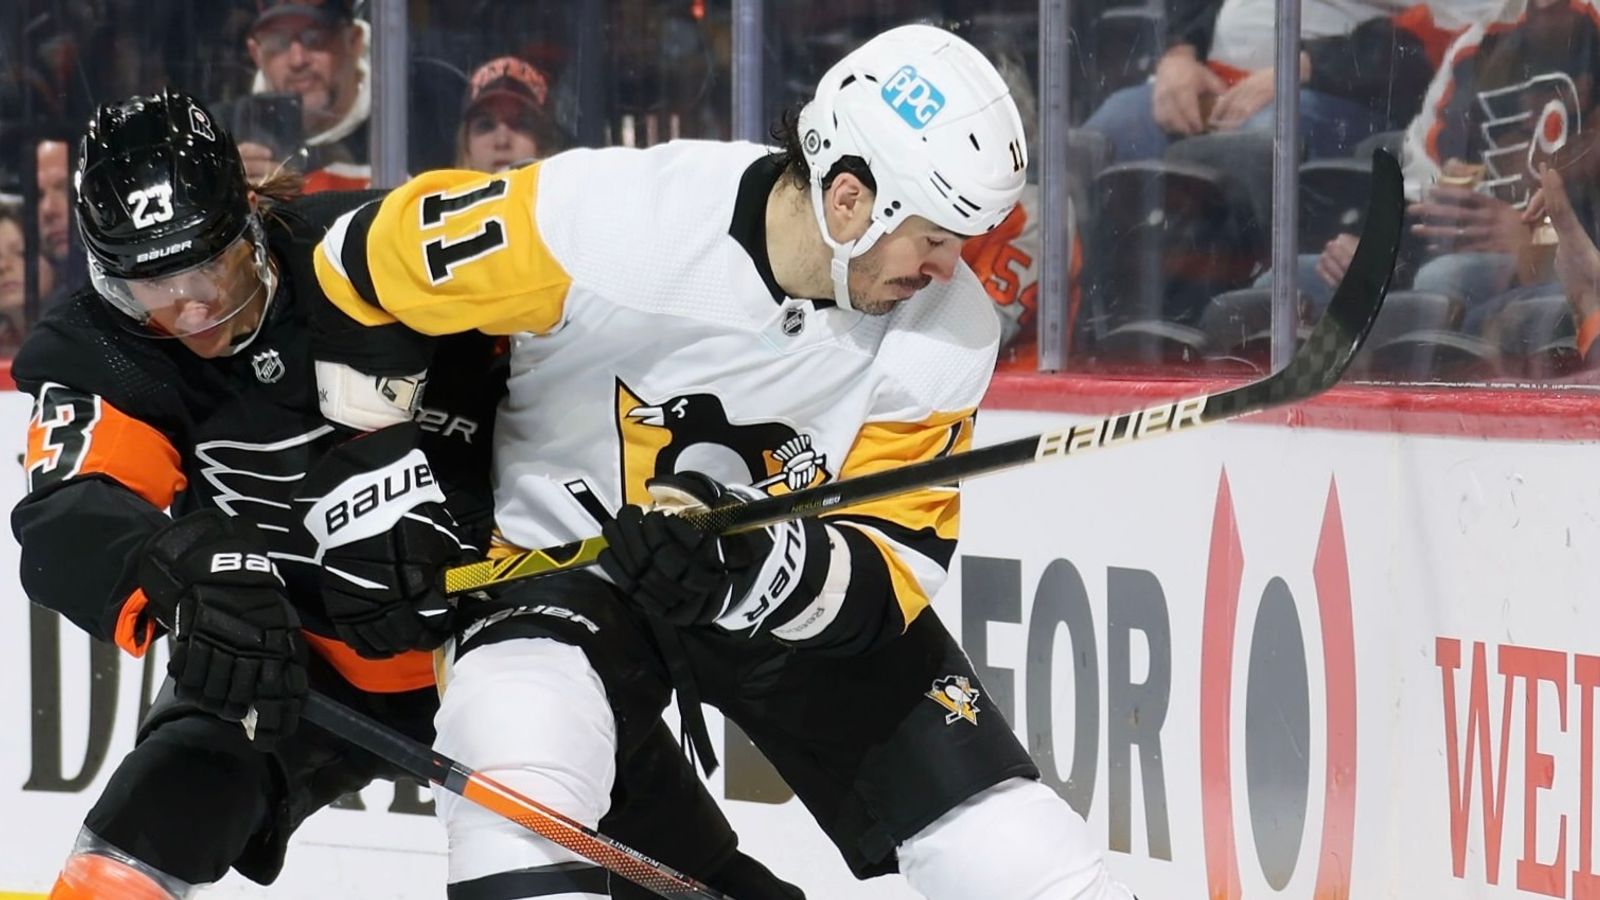 Penguins' Masterton Trophy nominee Brian Boyle driven by love for